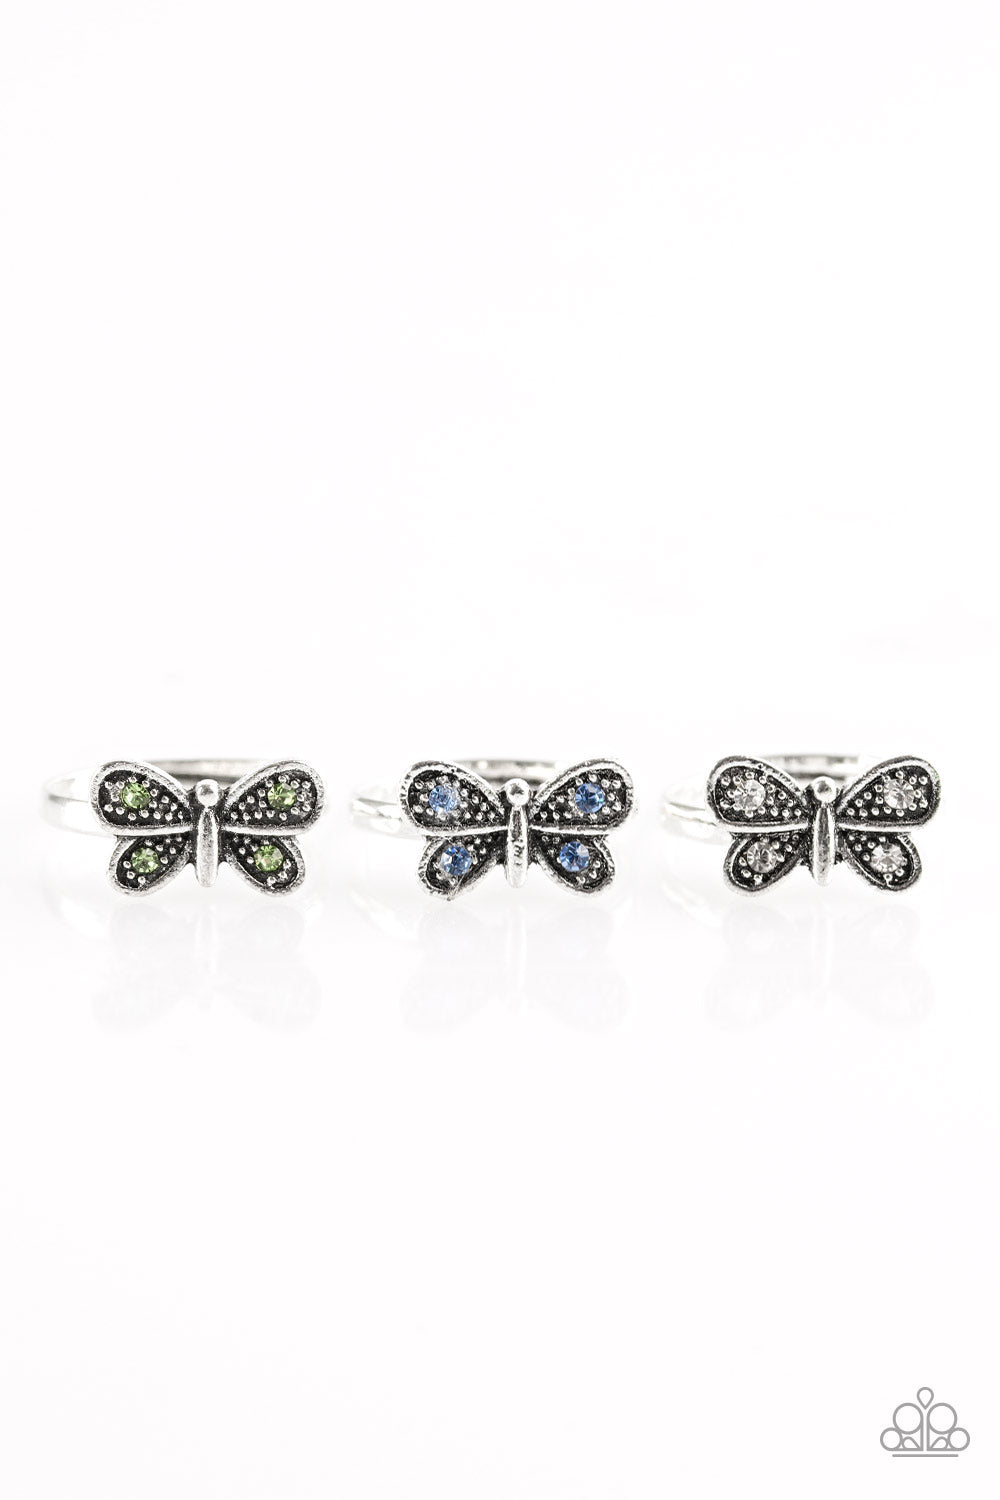 Paparazzi Starlet Shimmer Rings - 10 - Butterfly with Green, Blue, White and Pink Rhinestones - $5 Jewelry With Ashley Swint